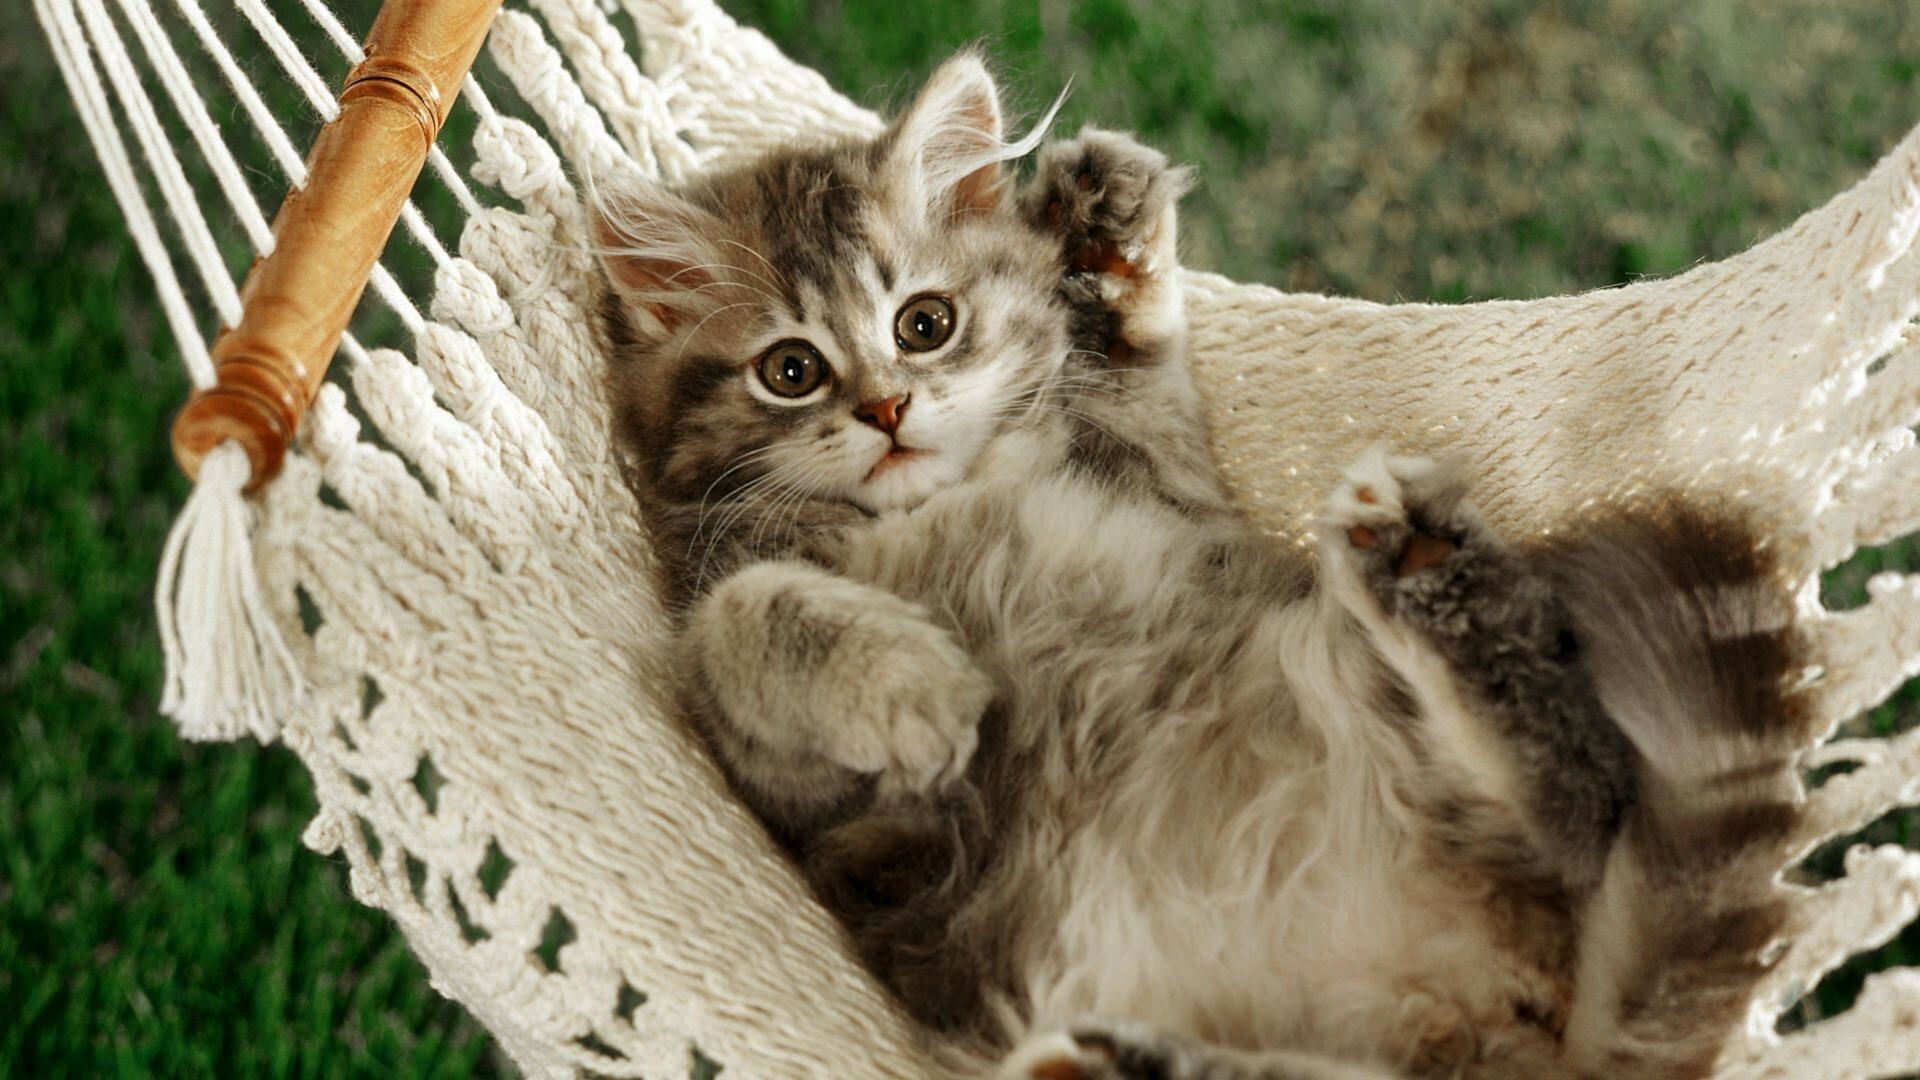 Kitten: Valued by humans for companionship and their ability to kill rodents. 1920x1080 Full HD Wallpaper.